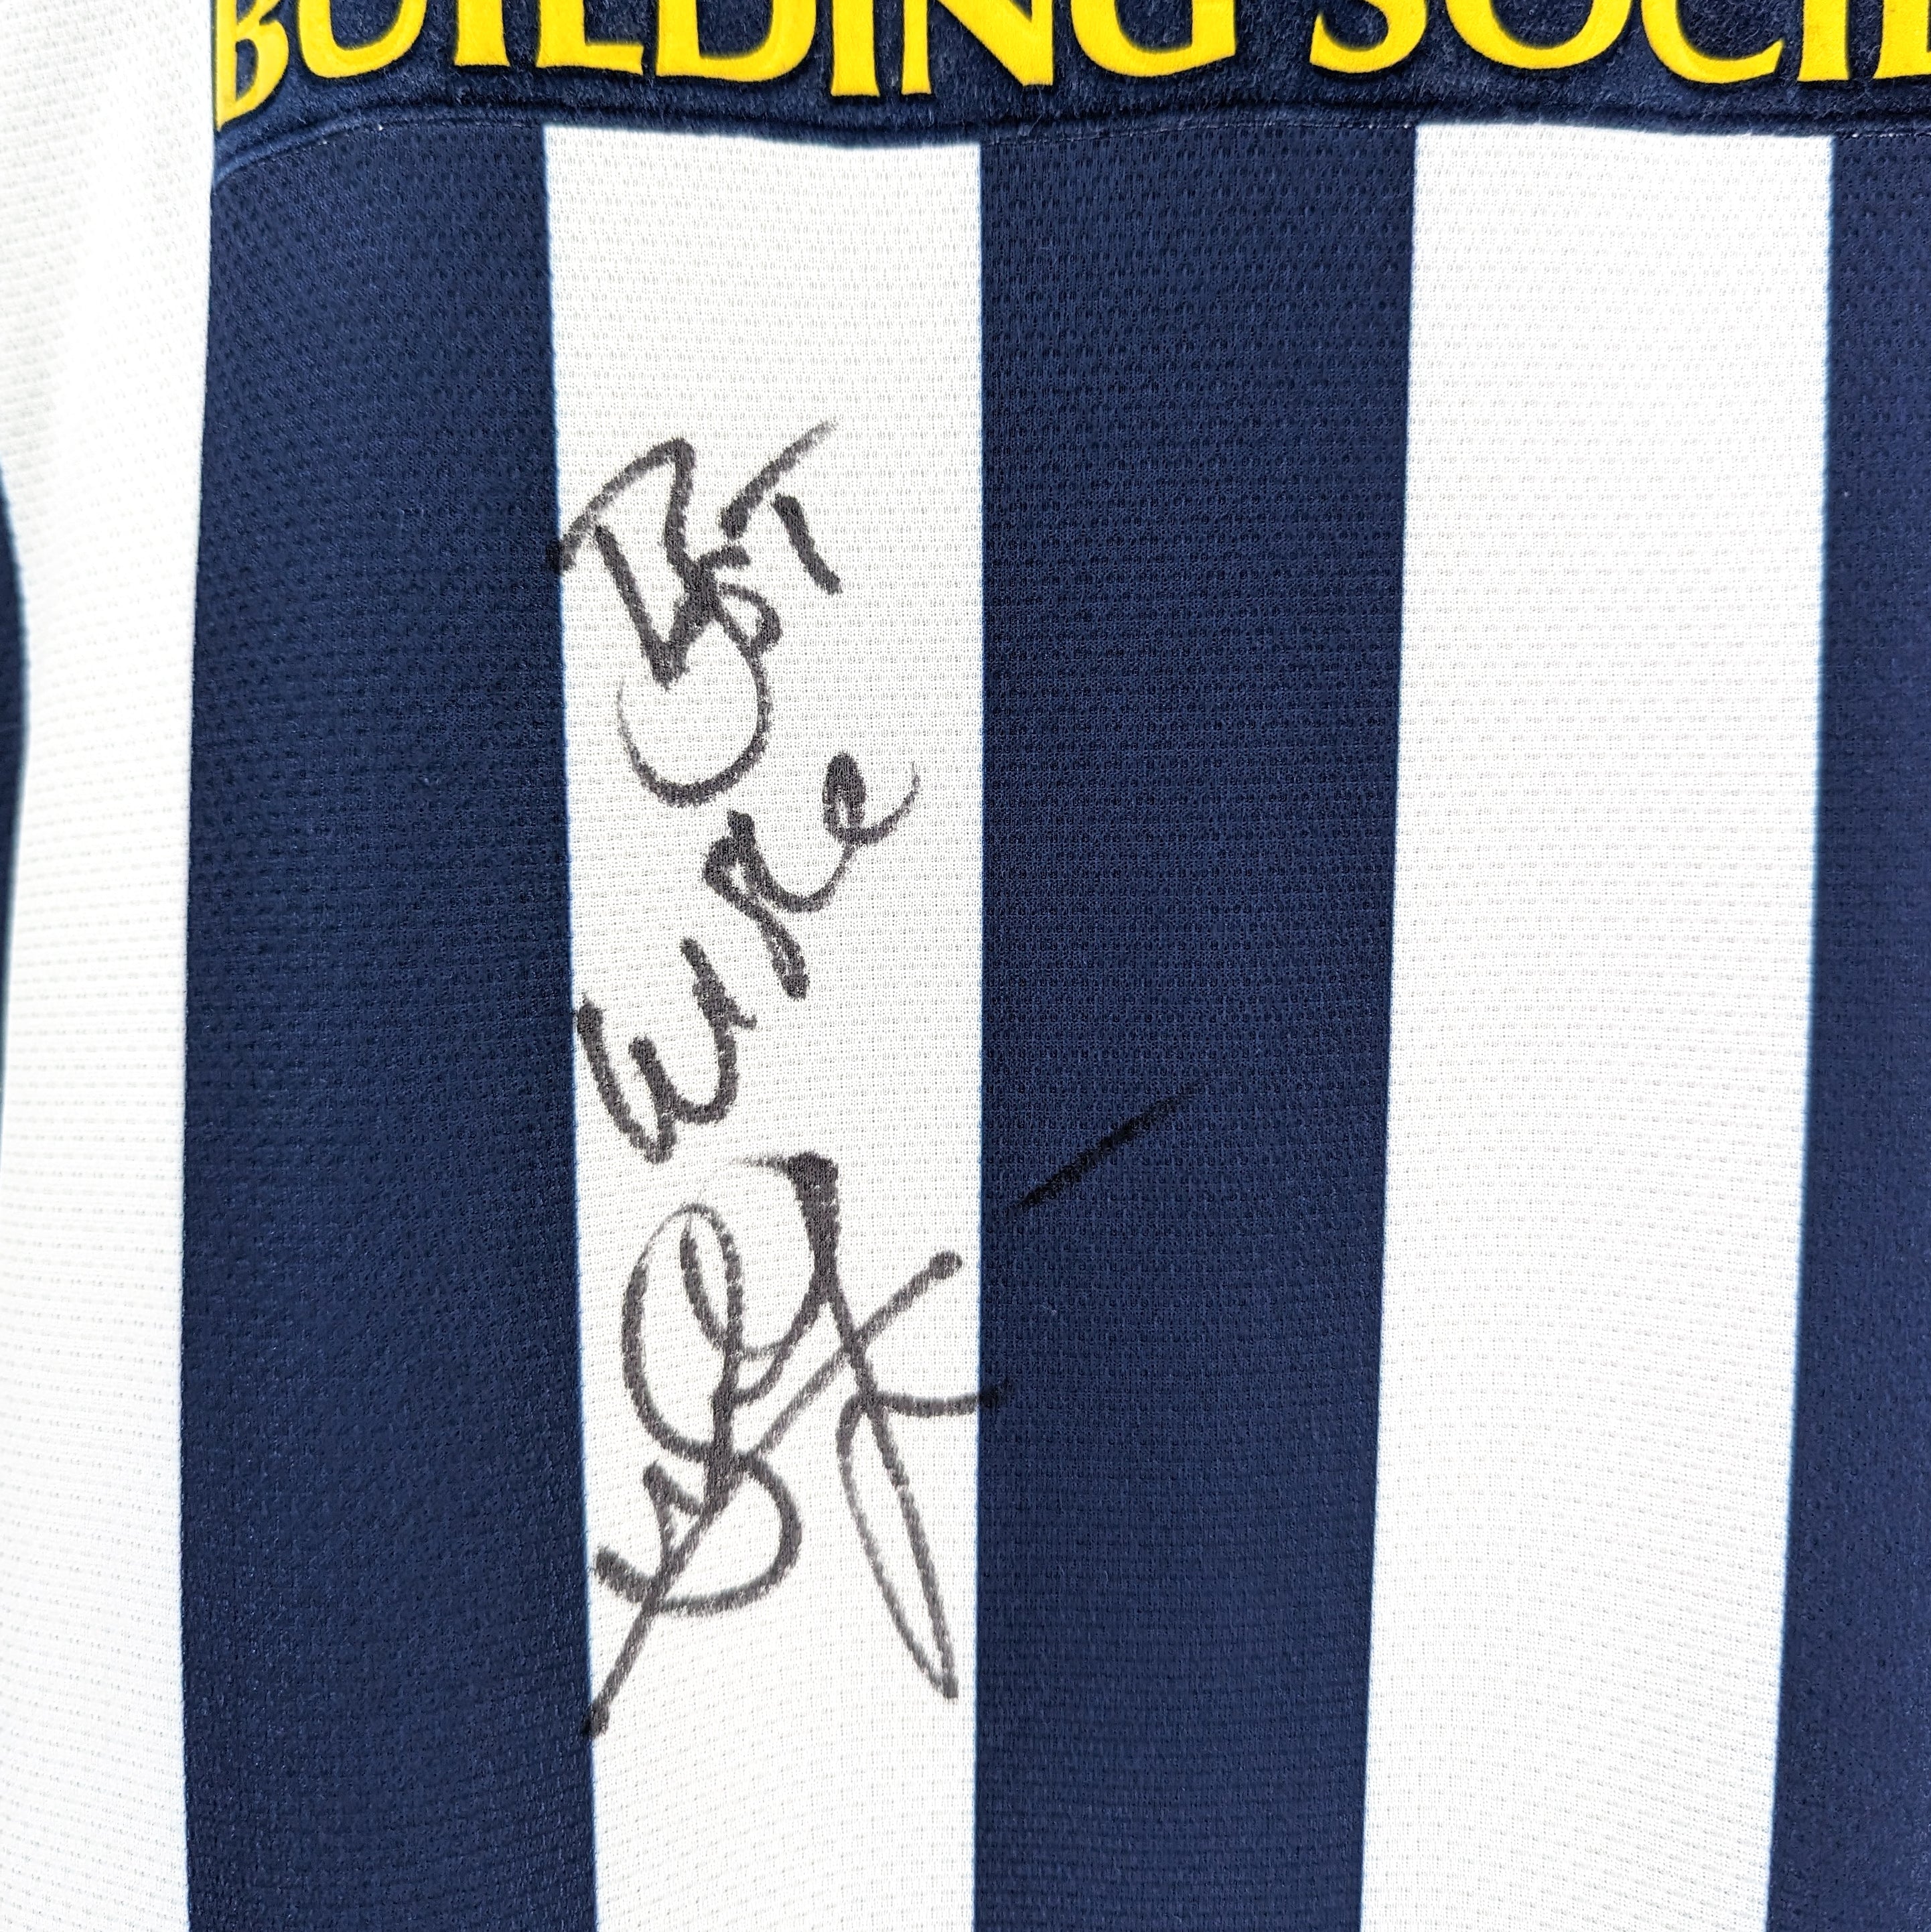 West Bromwich Albion signed home football shirt 2002/03